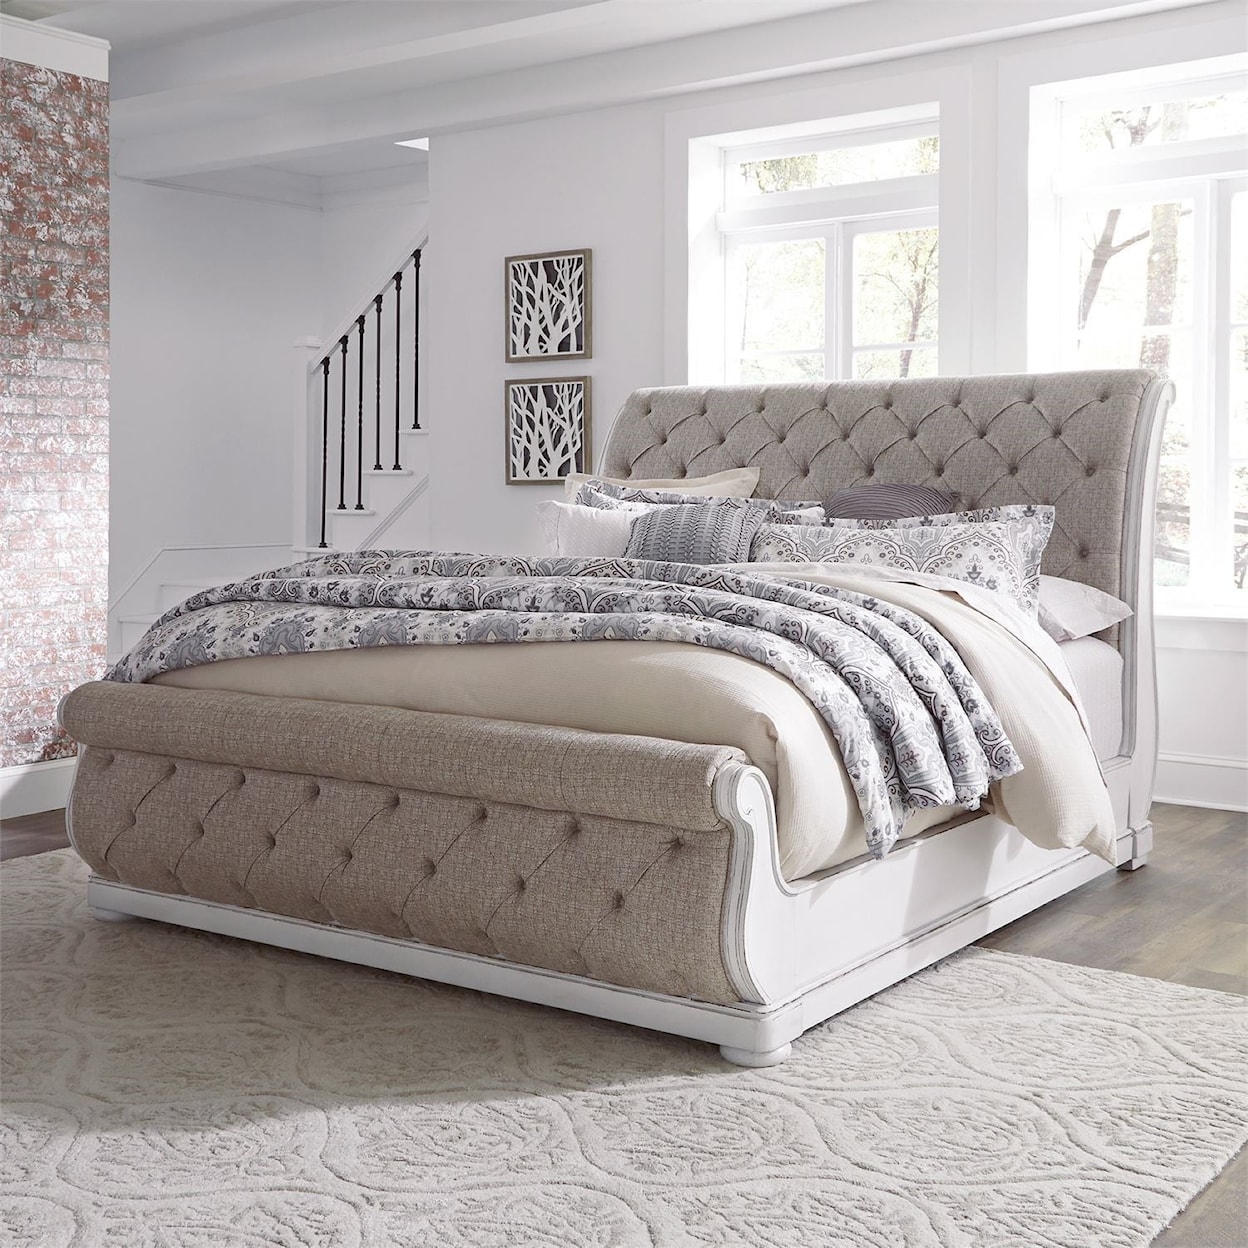 Libby Morgan Queen Upholstered Sleigh Bed